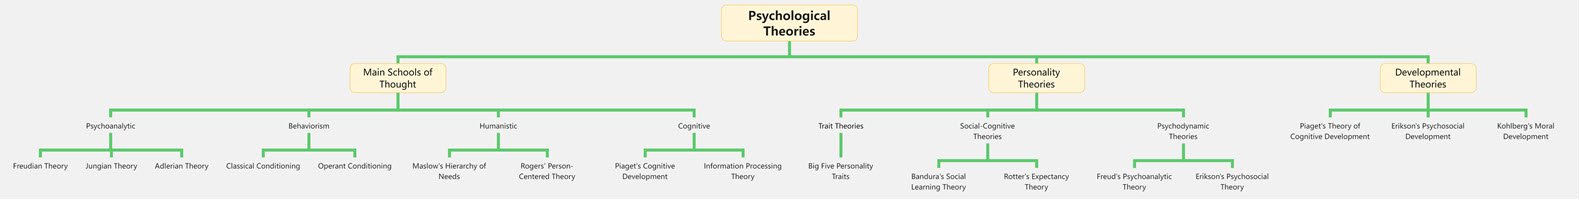 Tree Chart of Psychological Theories